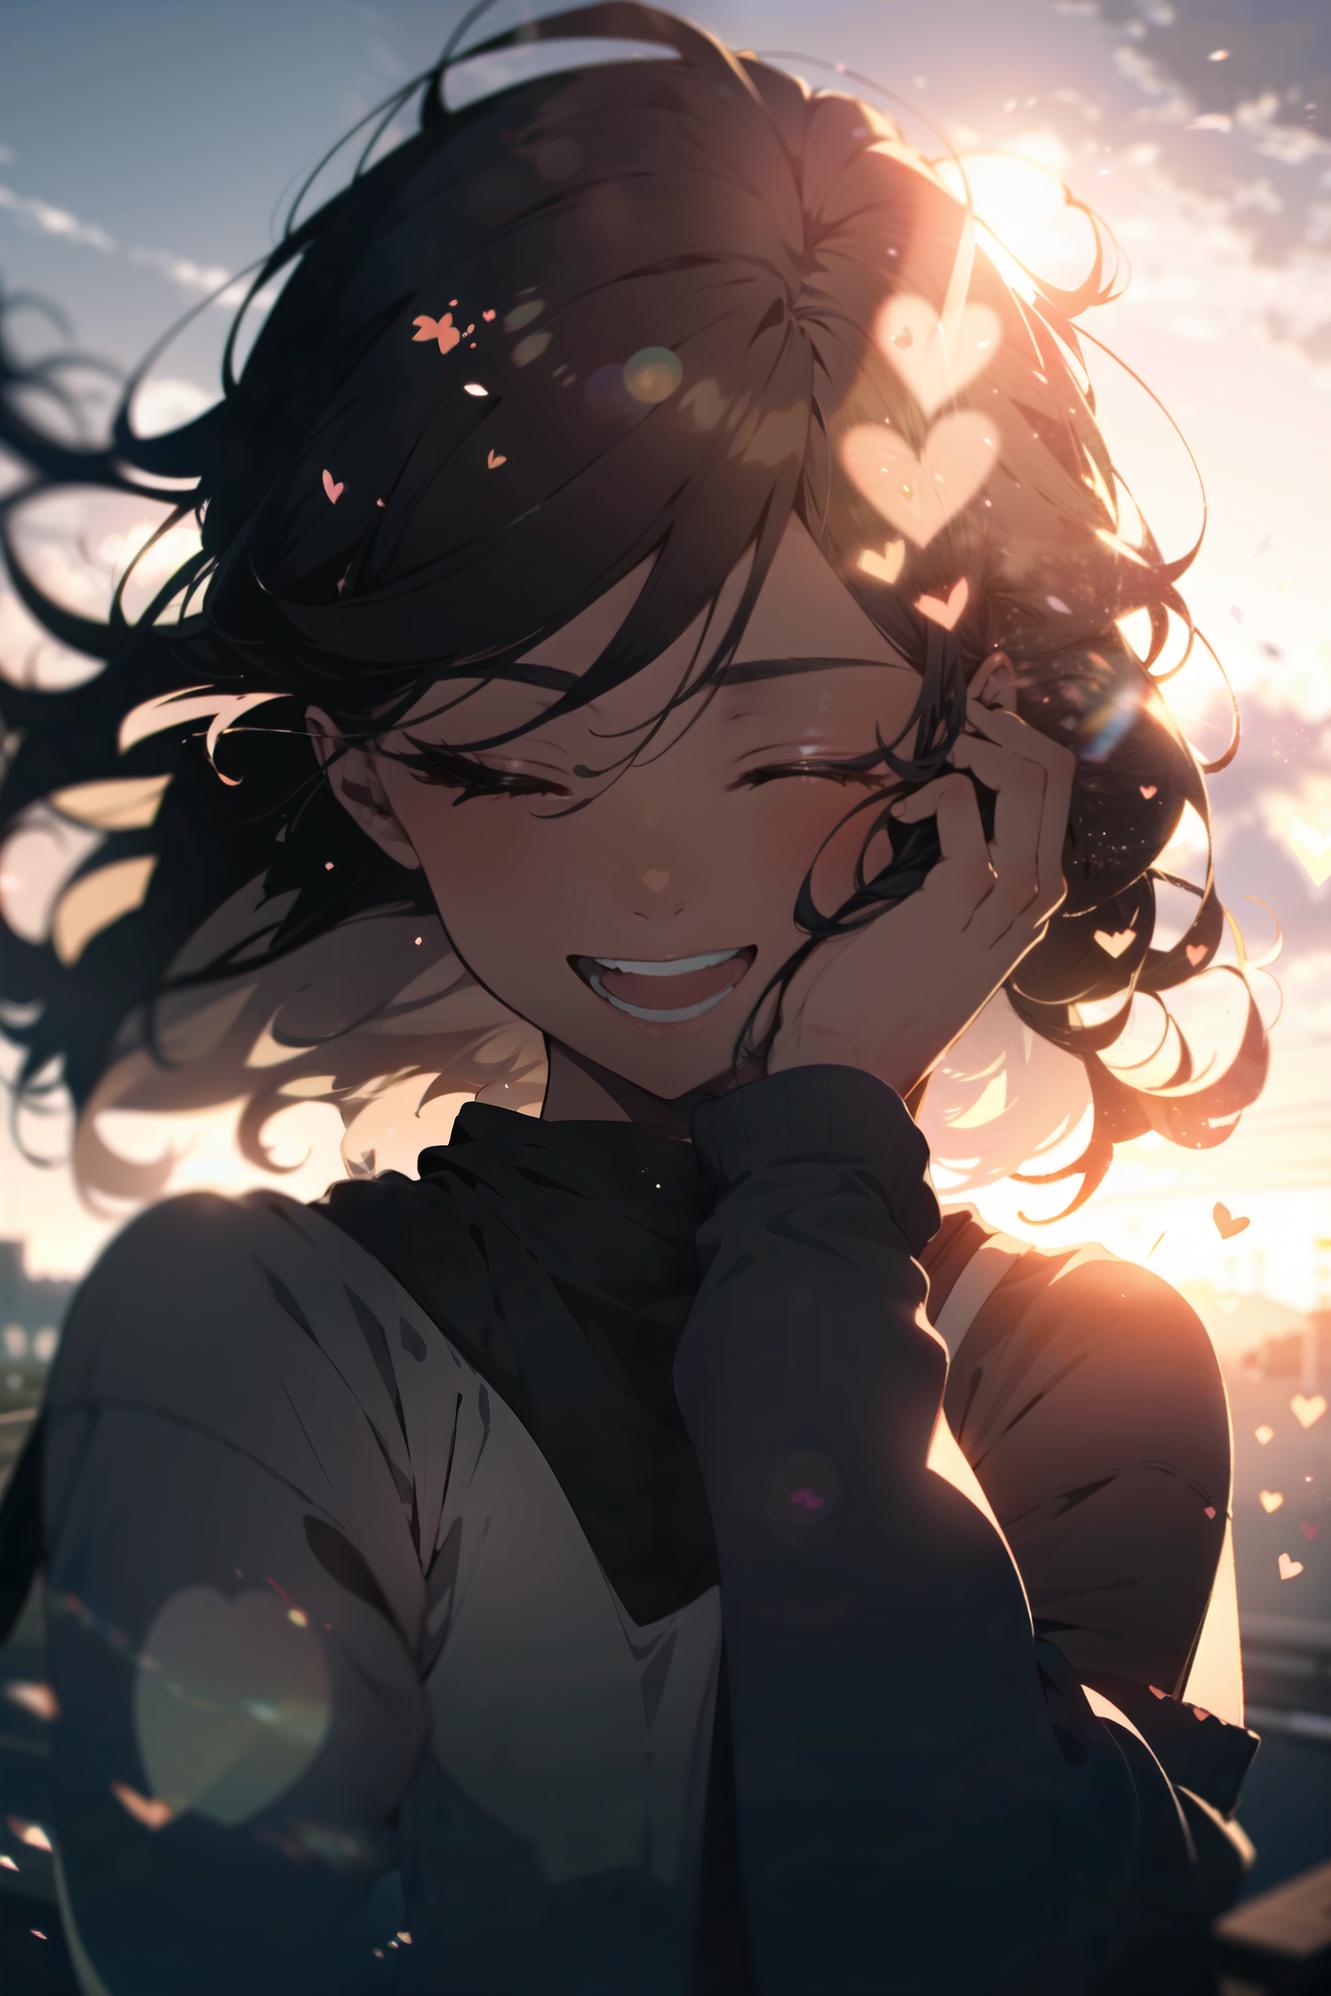 A smiling girl with dark hair and hearts in the background.